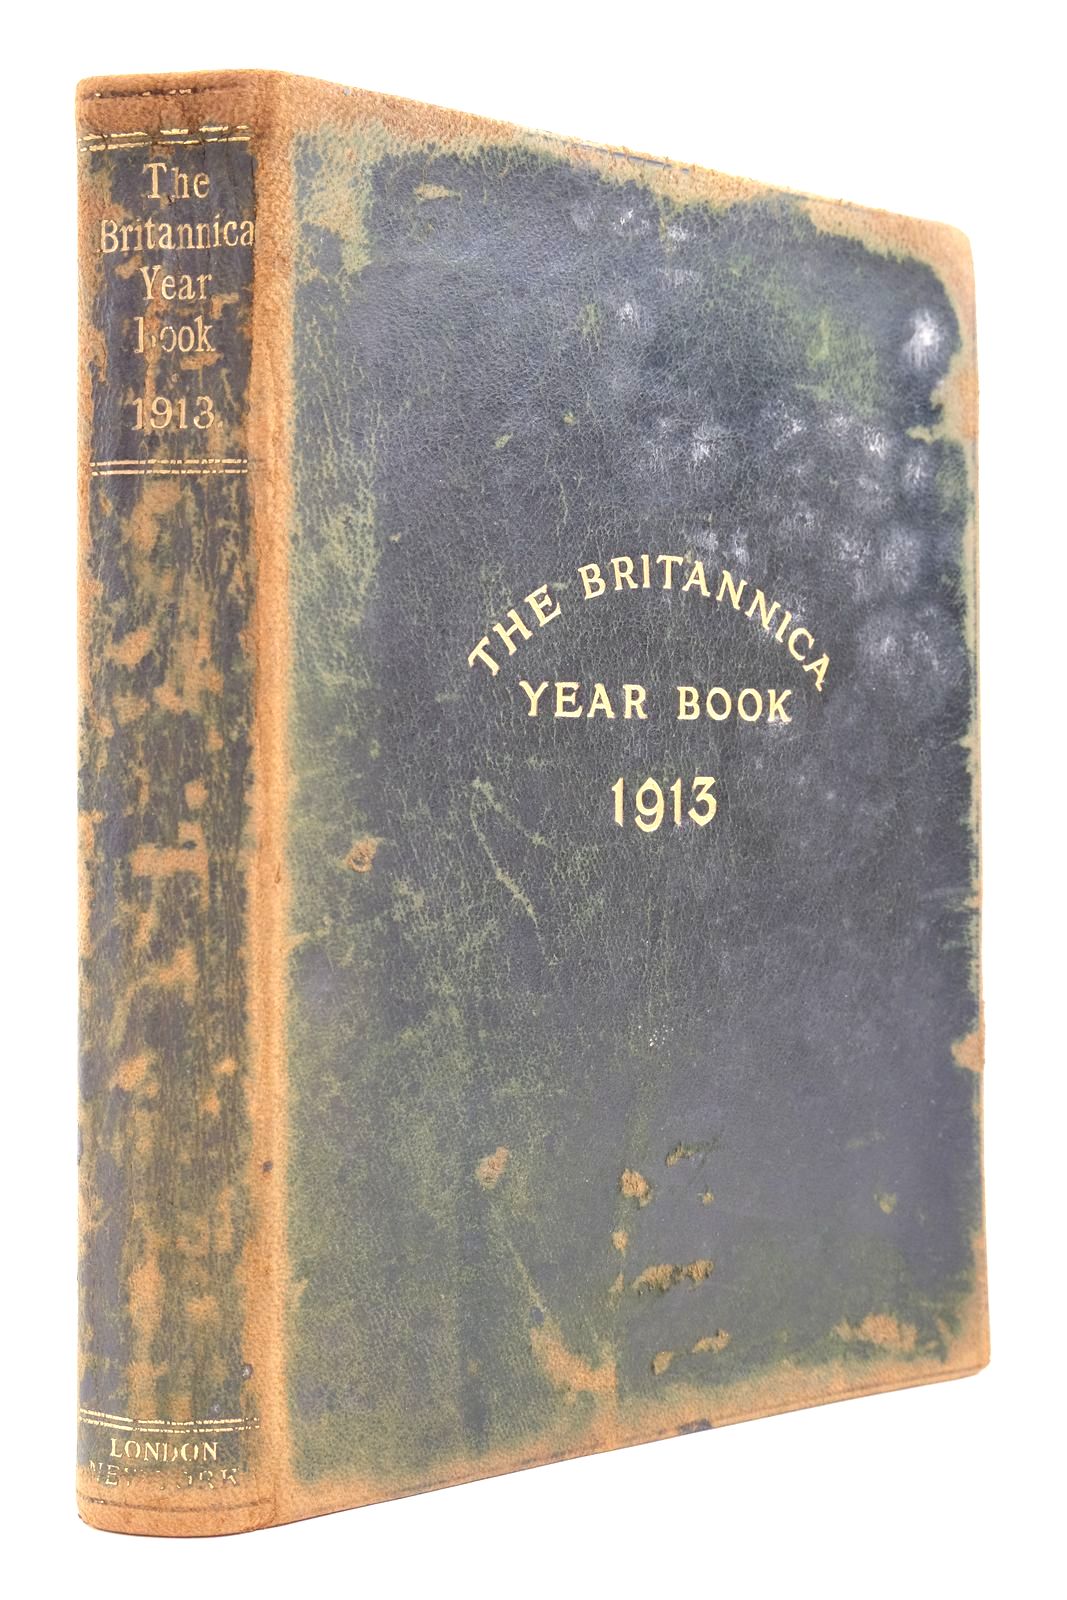 Photo of THE BRITANNICA YEAR-BOOK 1913 written by Chisholm, Hugh published by The Encyclopaedia Britannica Company (STOCK CODE: 2139059)  for sale by Stella & Rose's Books